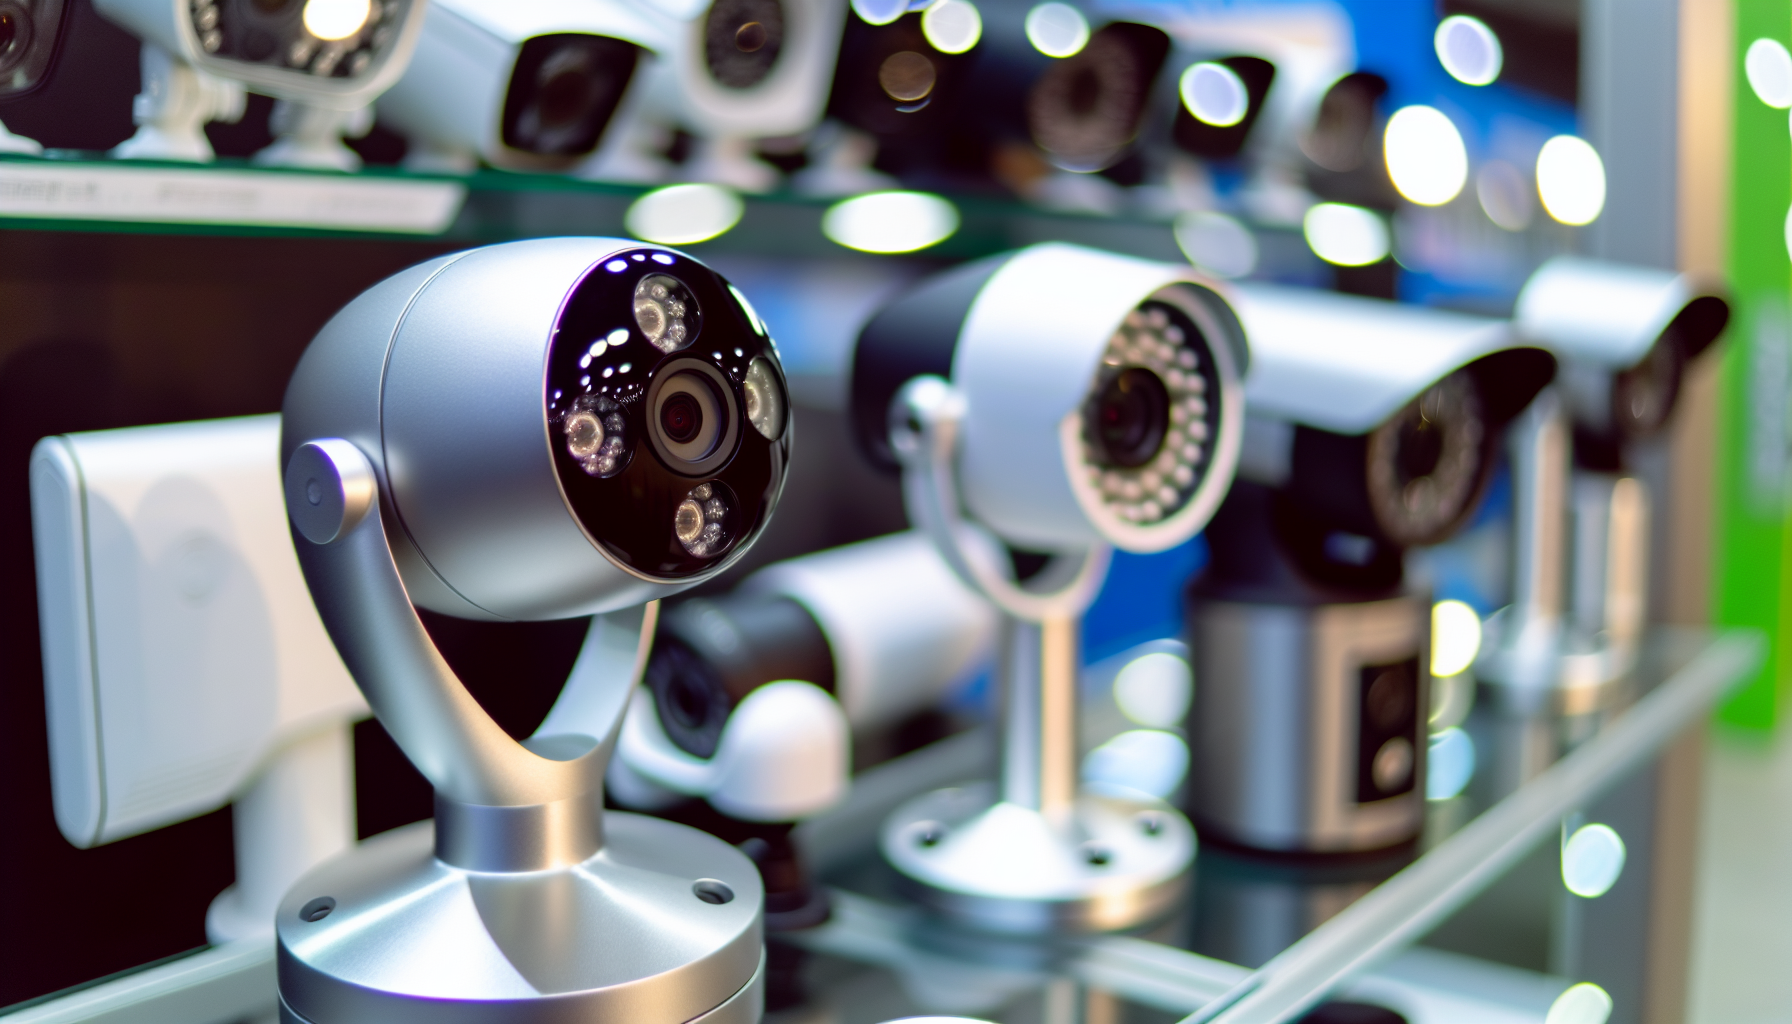 Choosing the right security camera system